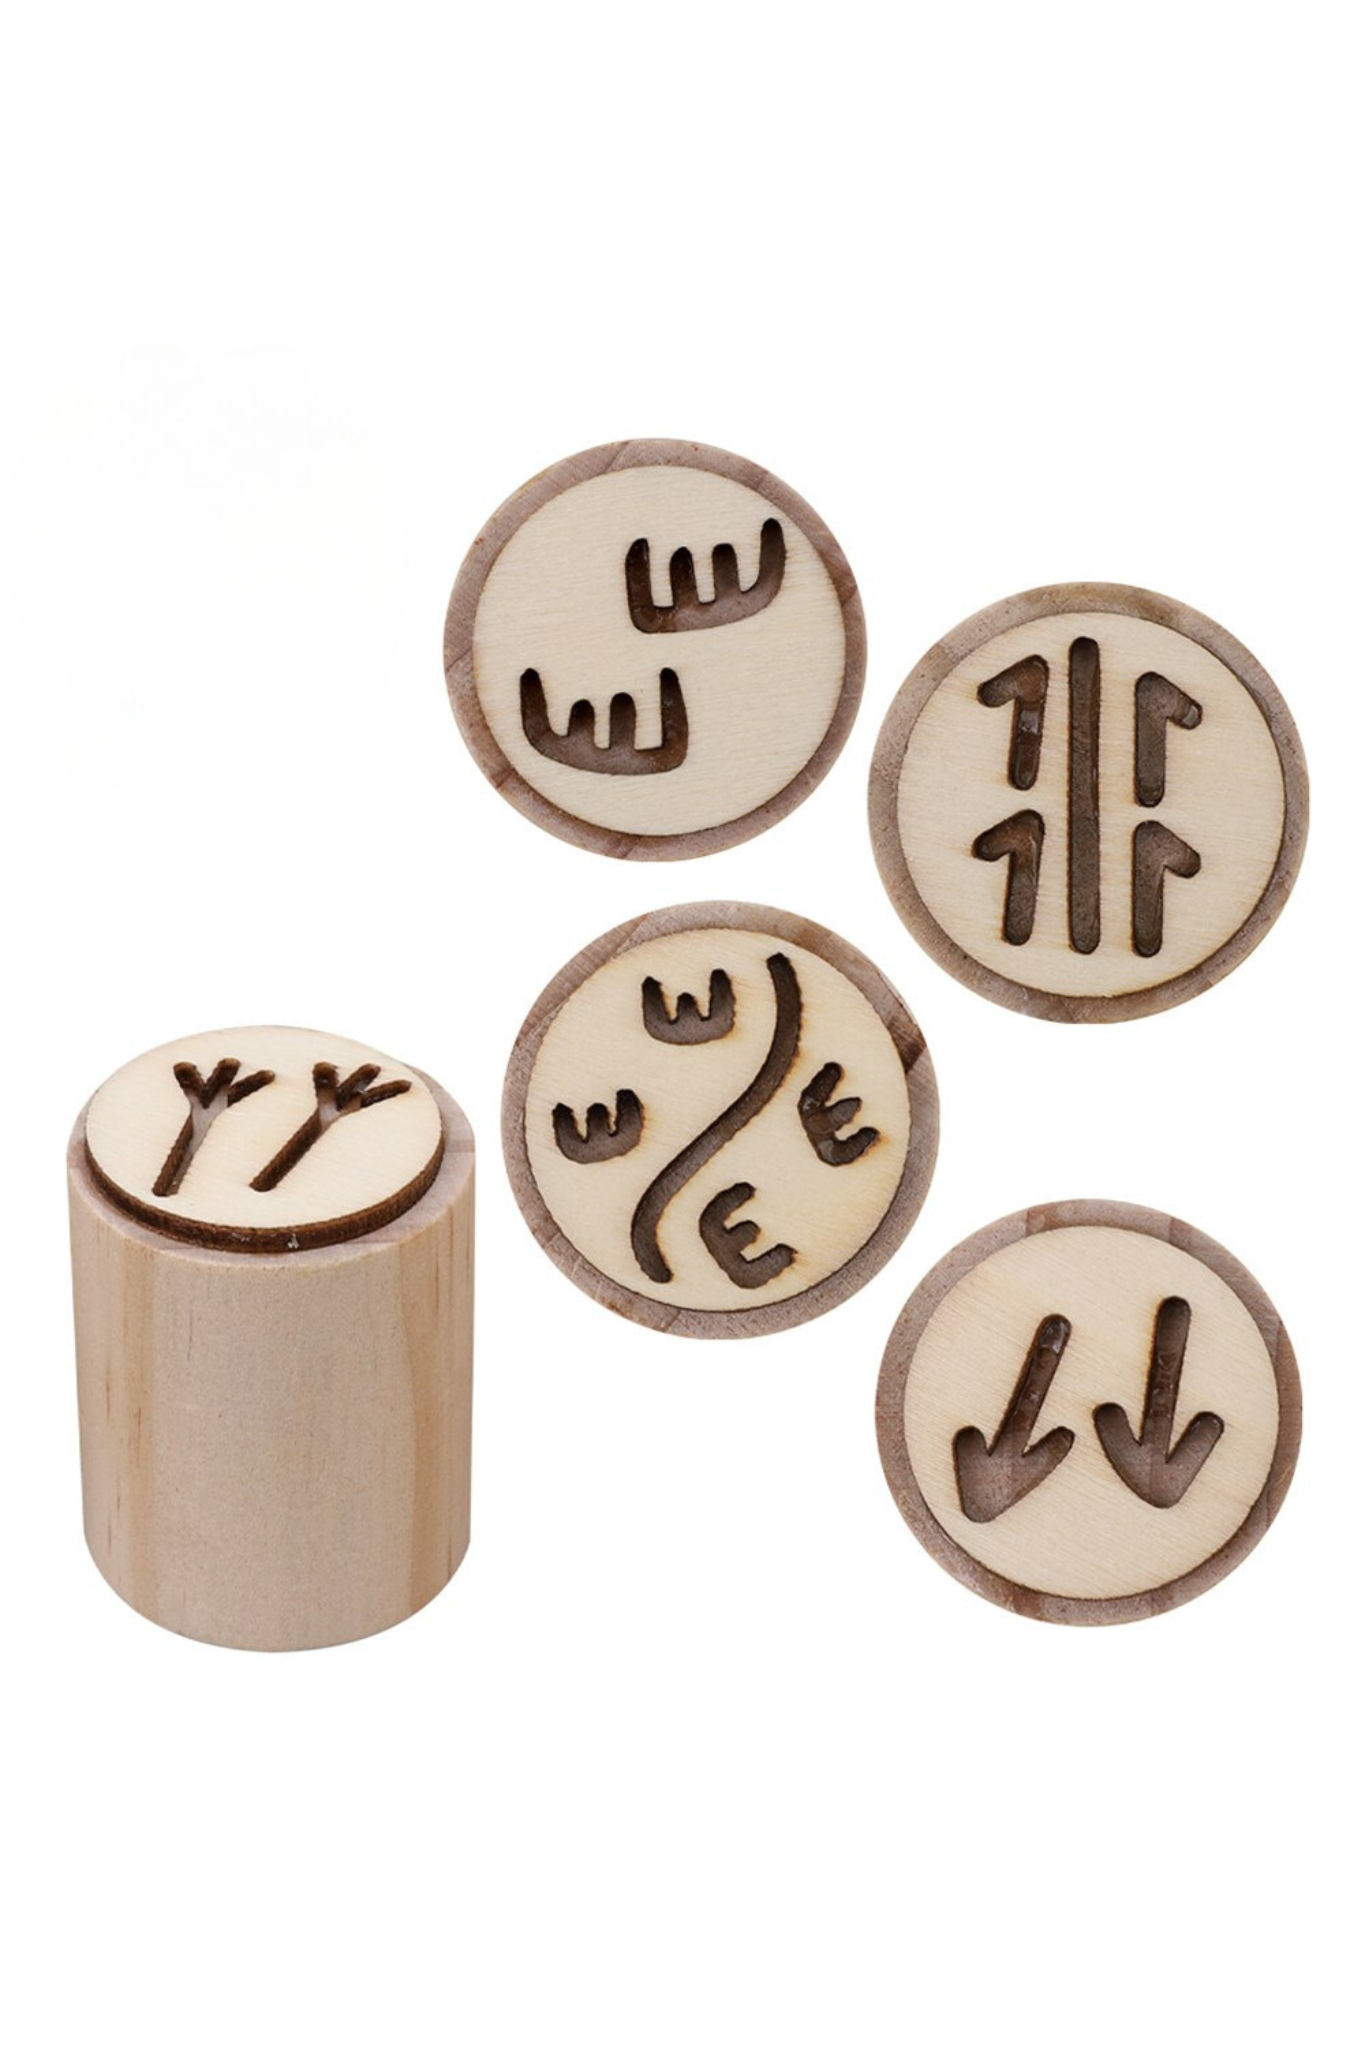 Indigenous Designed Wooden Stamps - Pack of 10